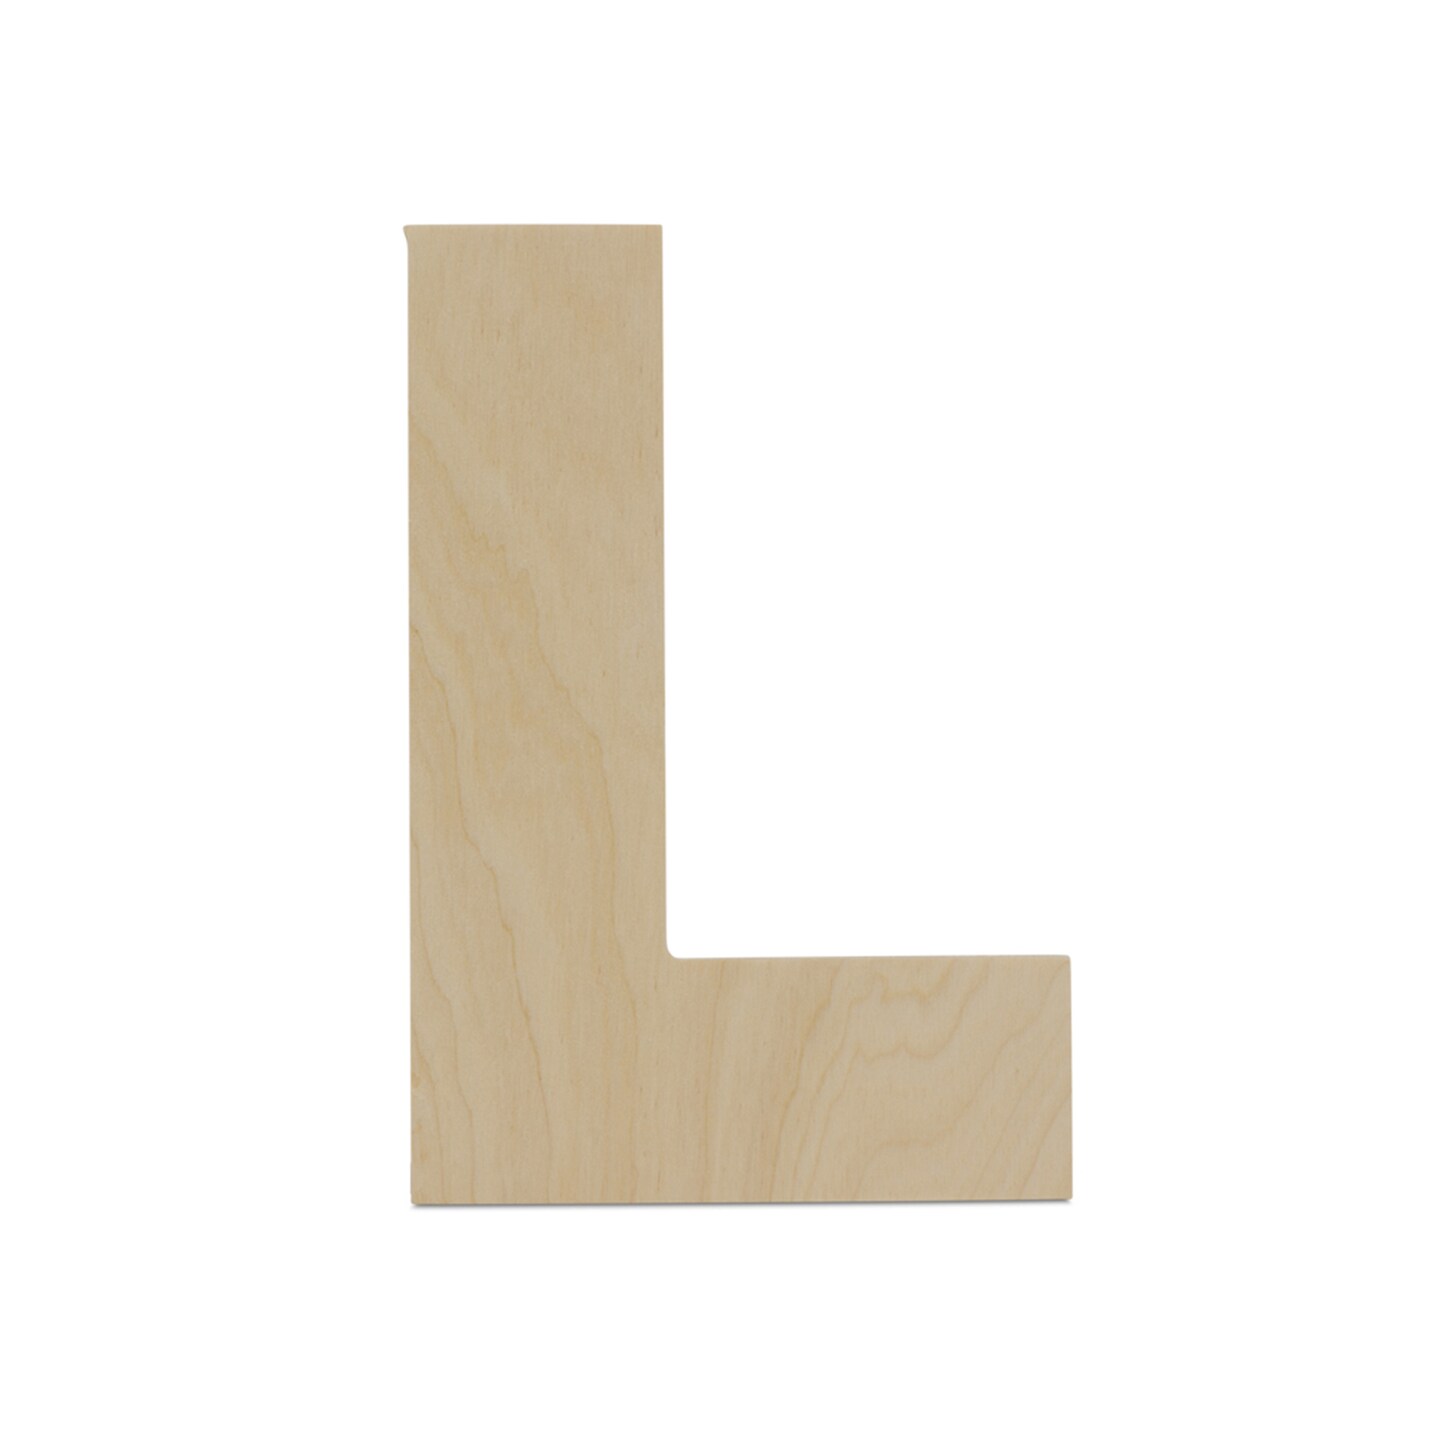 Wooden Letter L 12 inch or 8 inch, Unfinished Large Wood Letters for Crafts | Woodpeckers